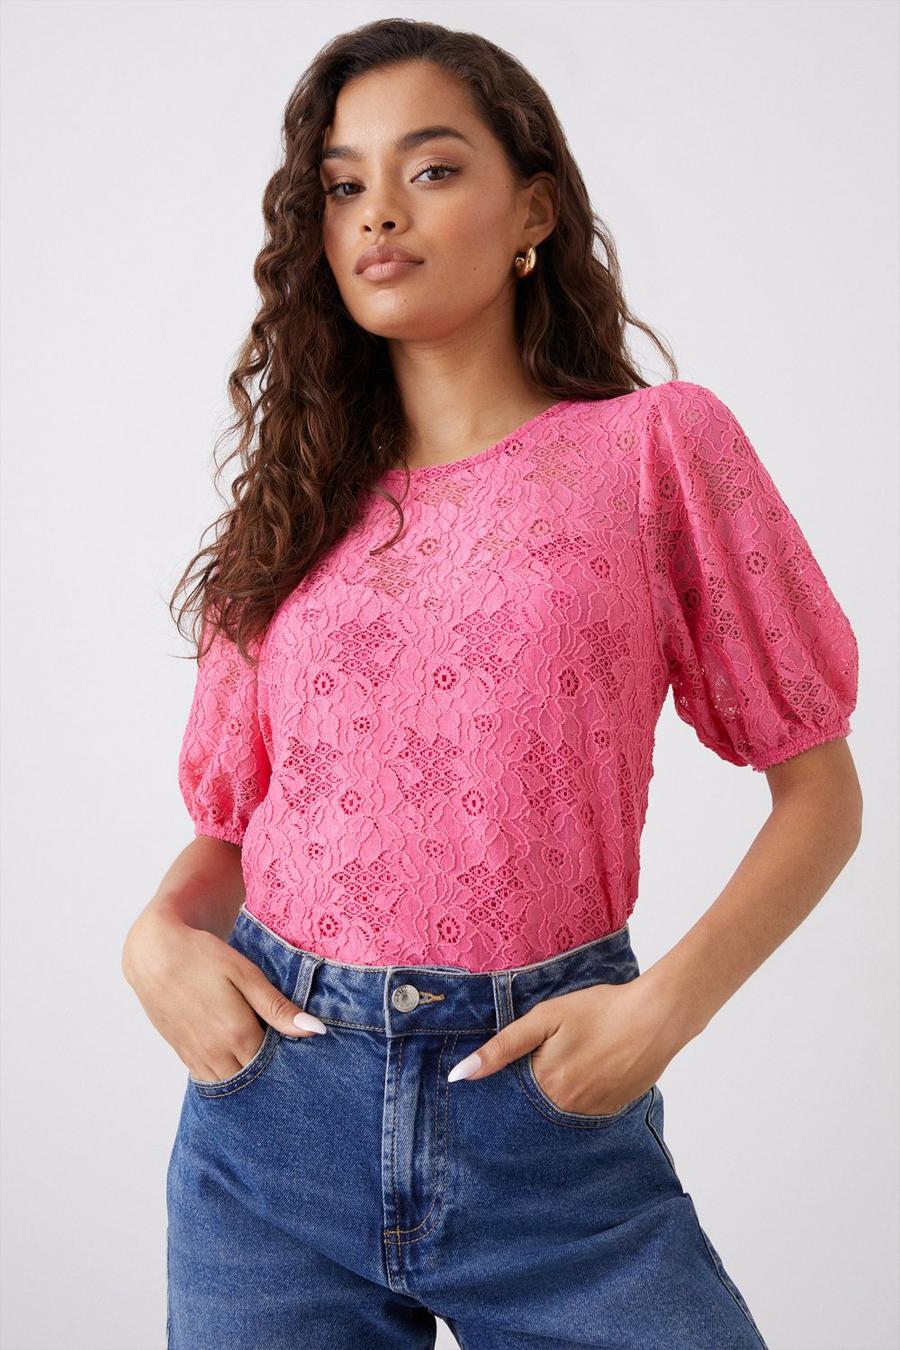 Petite Pink Lace Top